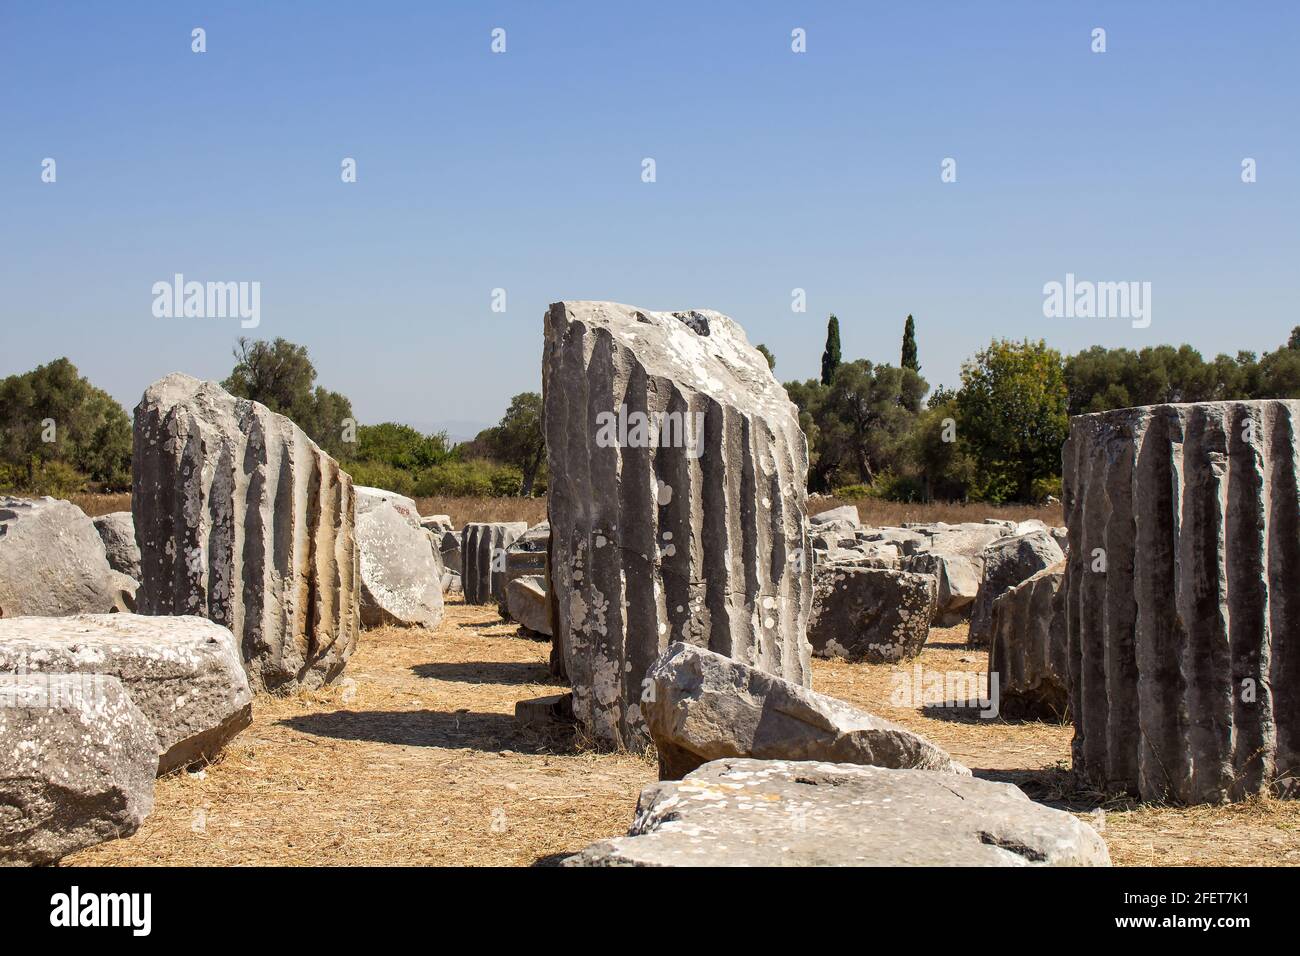 View of historical ruins and olive trees at ancient Greek city called Teos on the coast of Ionia located in Sigacik / Seferihisar district of Izmir pr Stock Photo